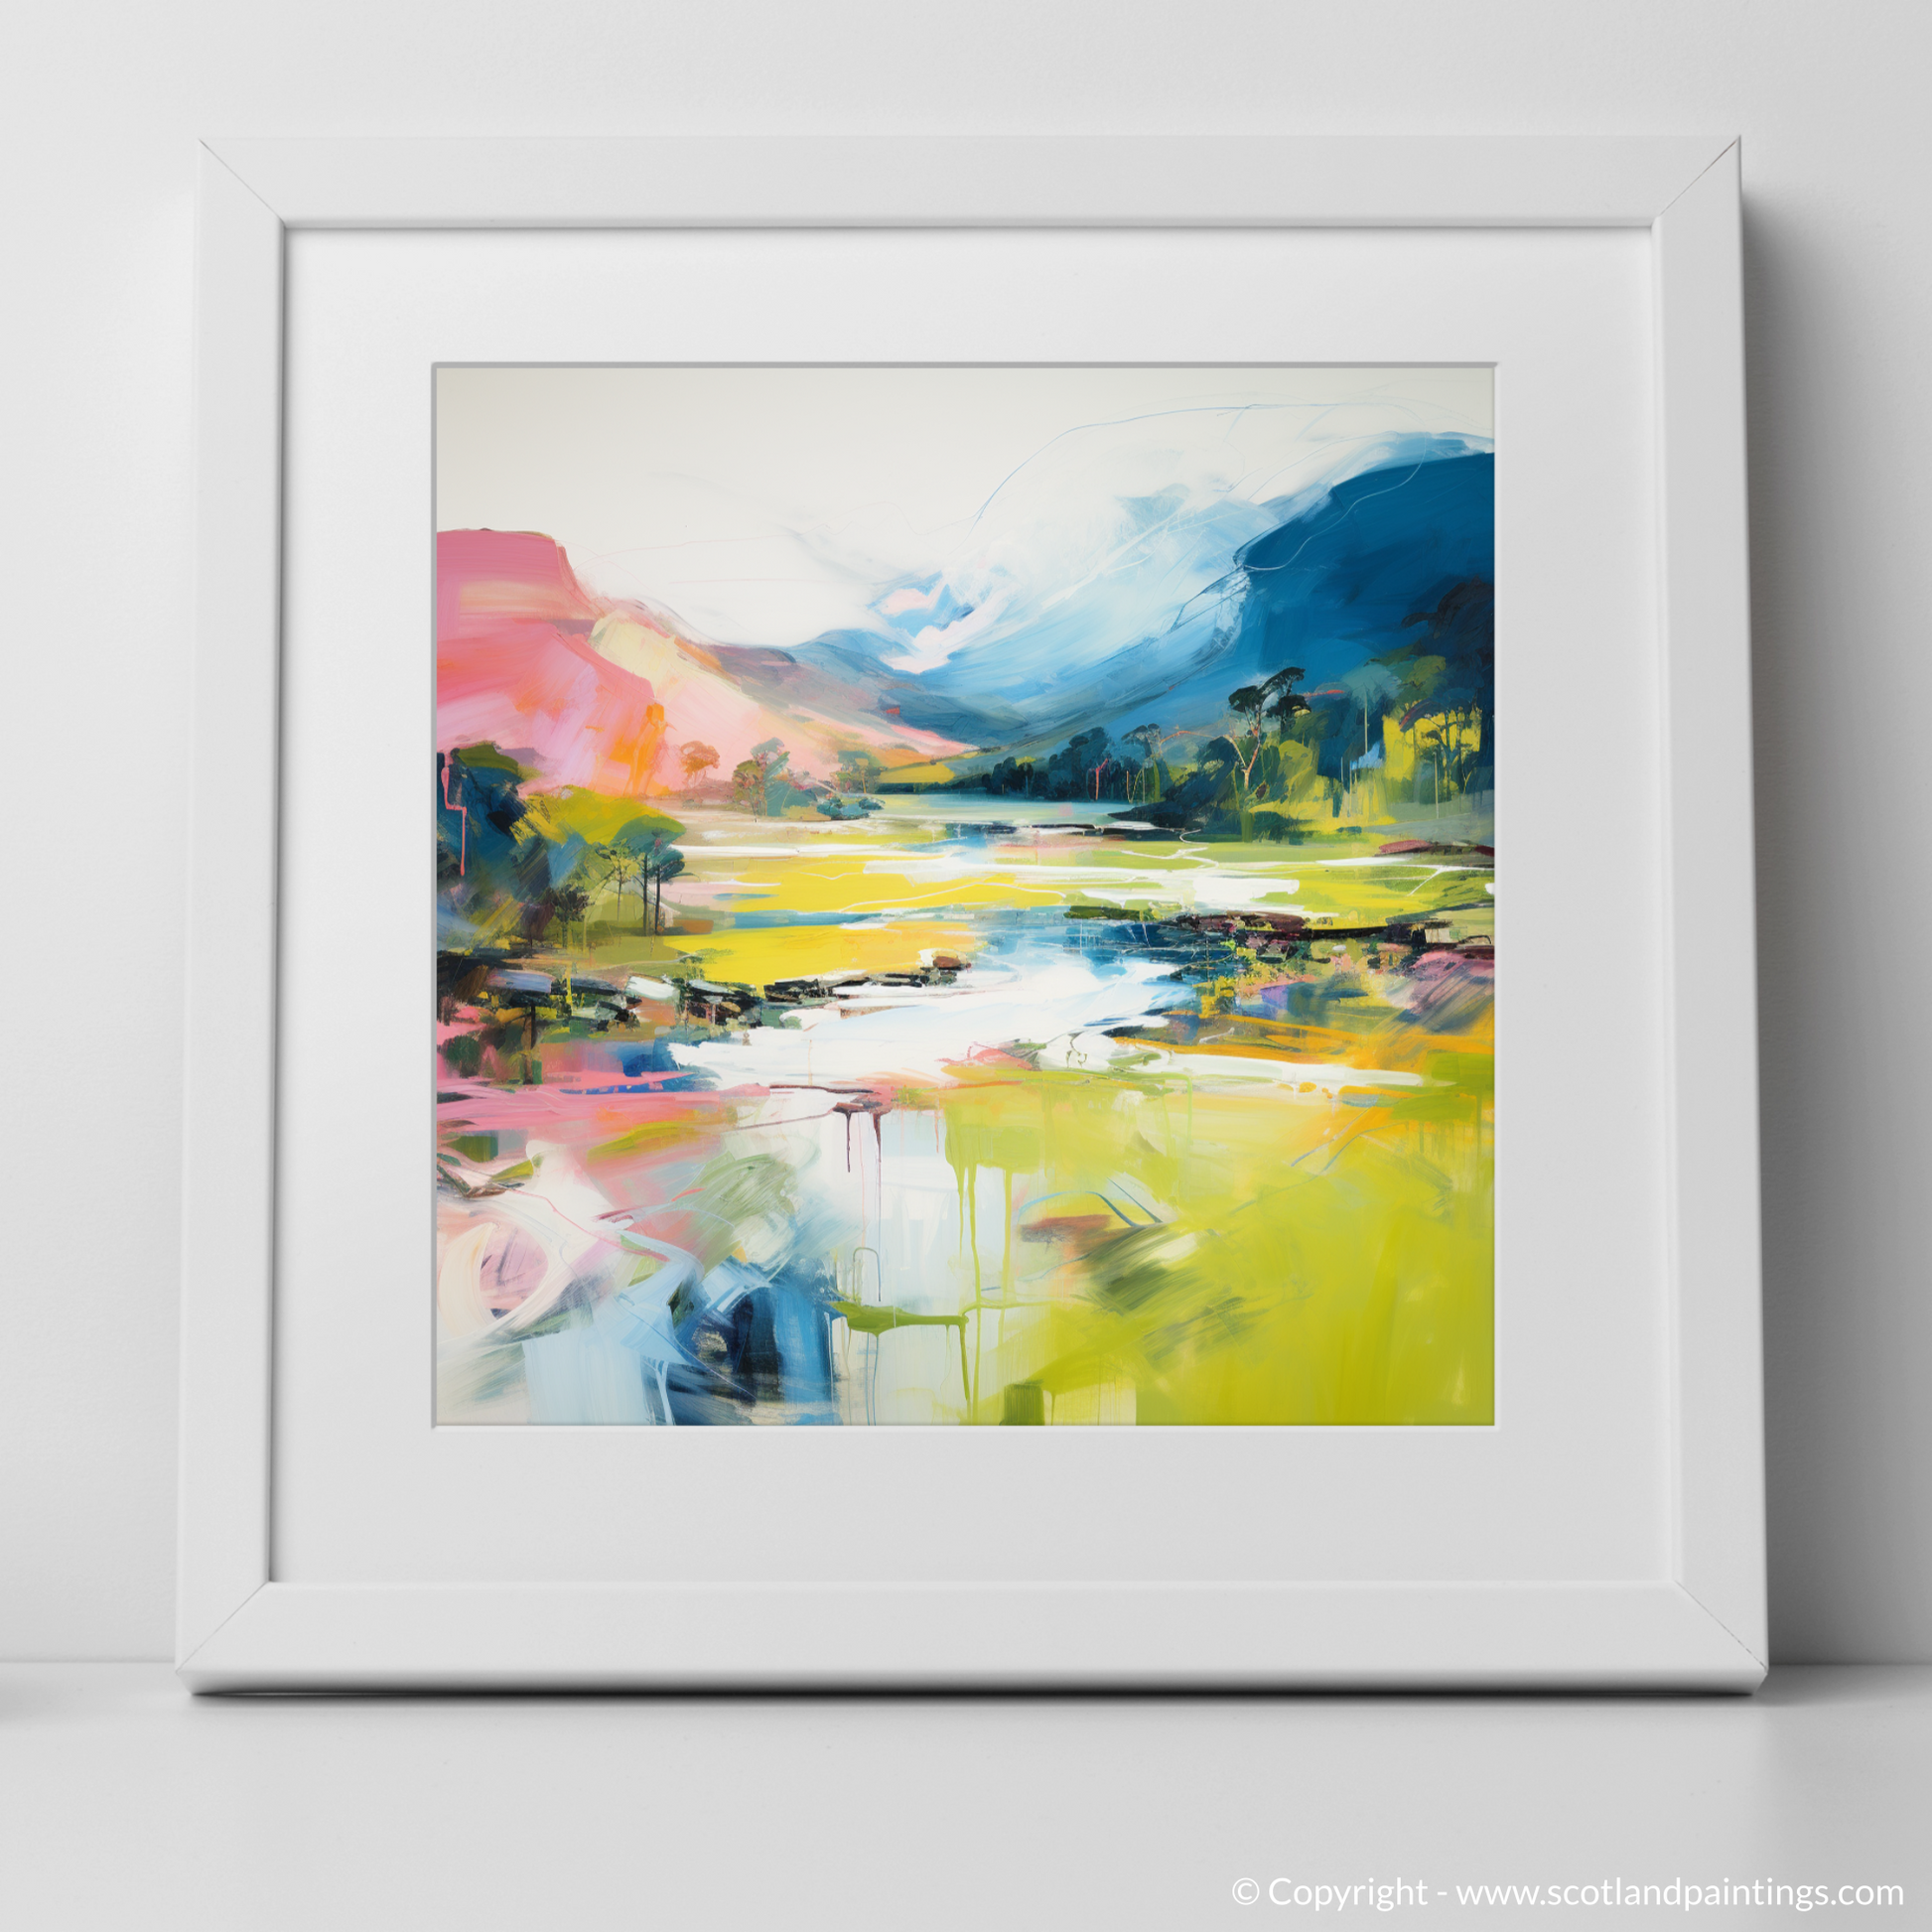 Art Print of River Spean, Highlands in summer with a white frame